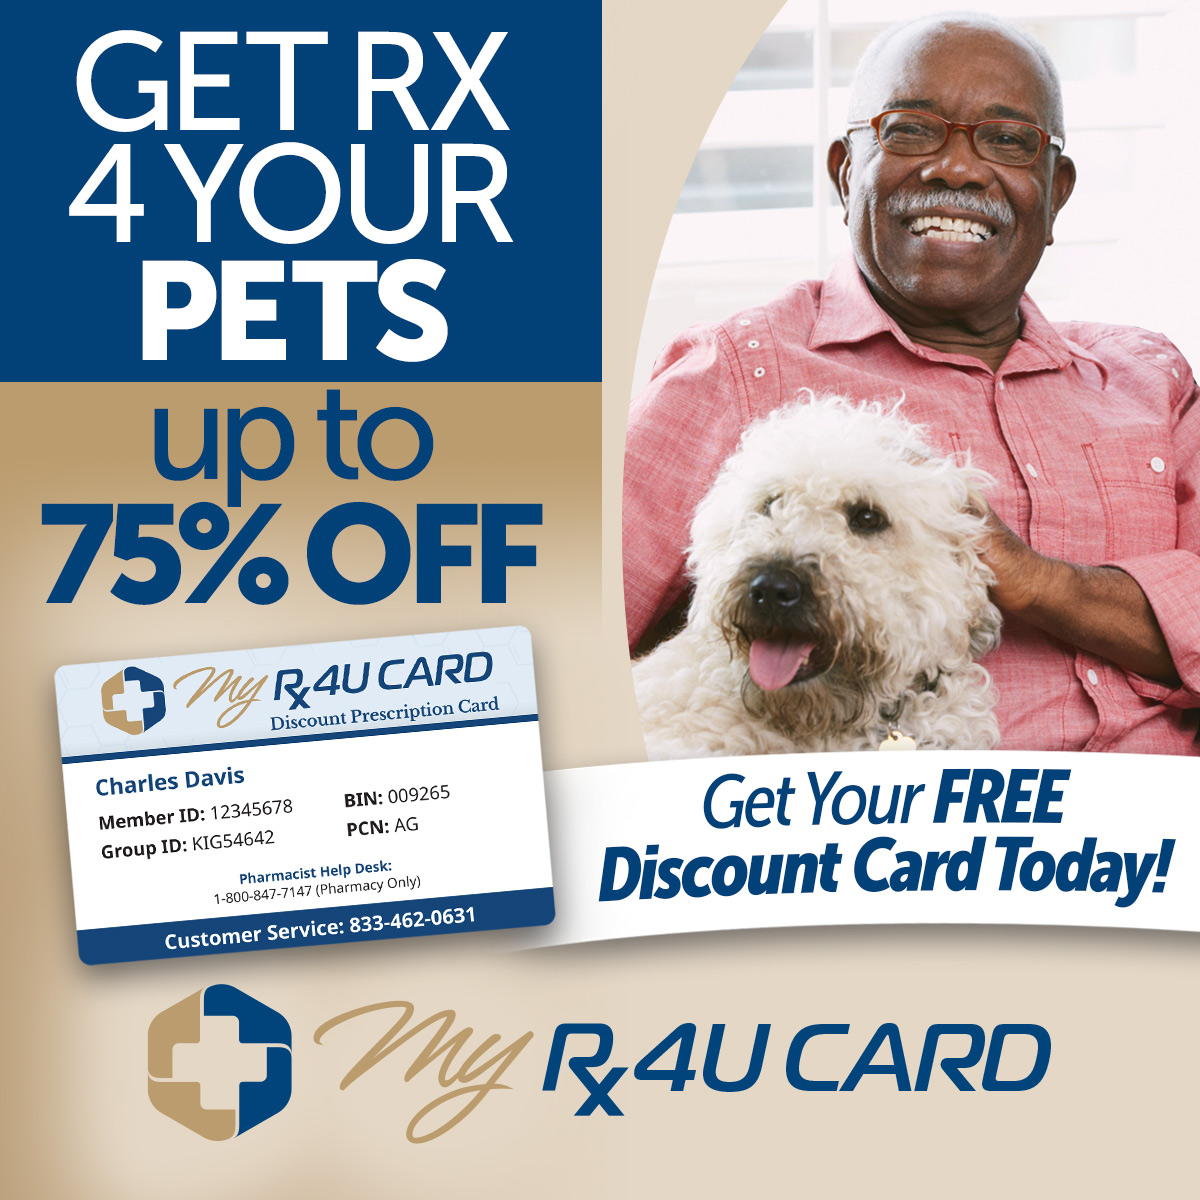 Get RX four your pets up to 75% off. Get your free discount card today! MyRX4U Card.